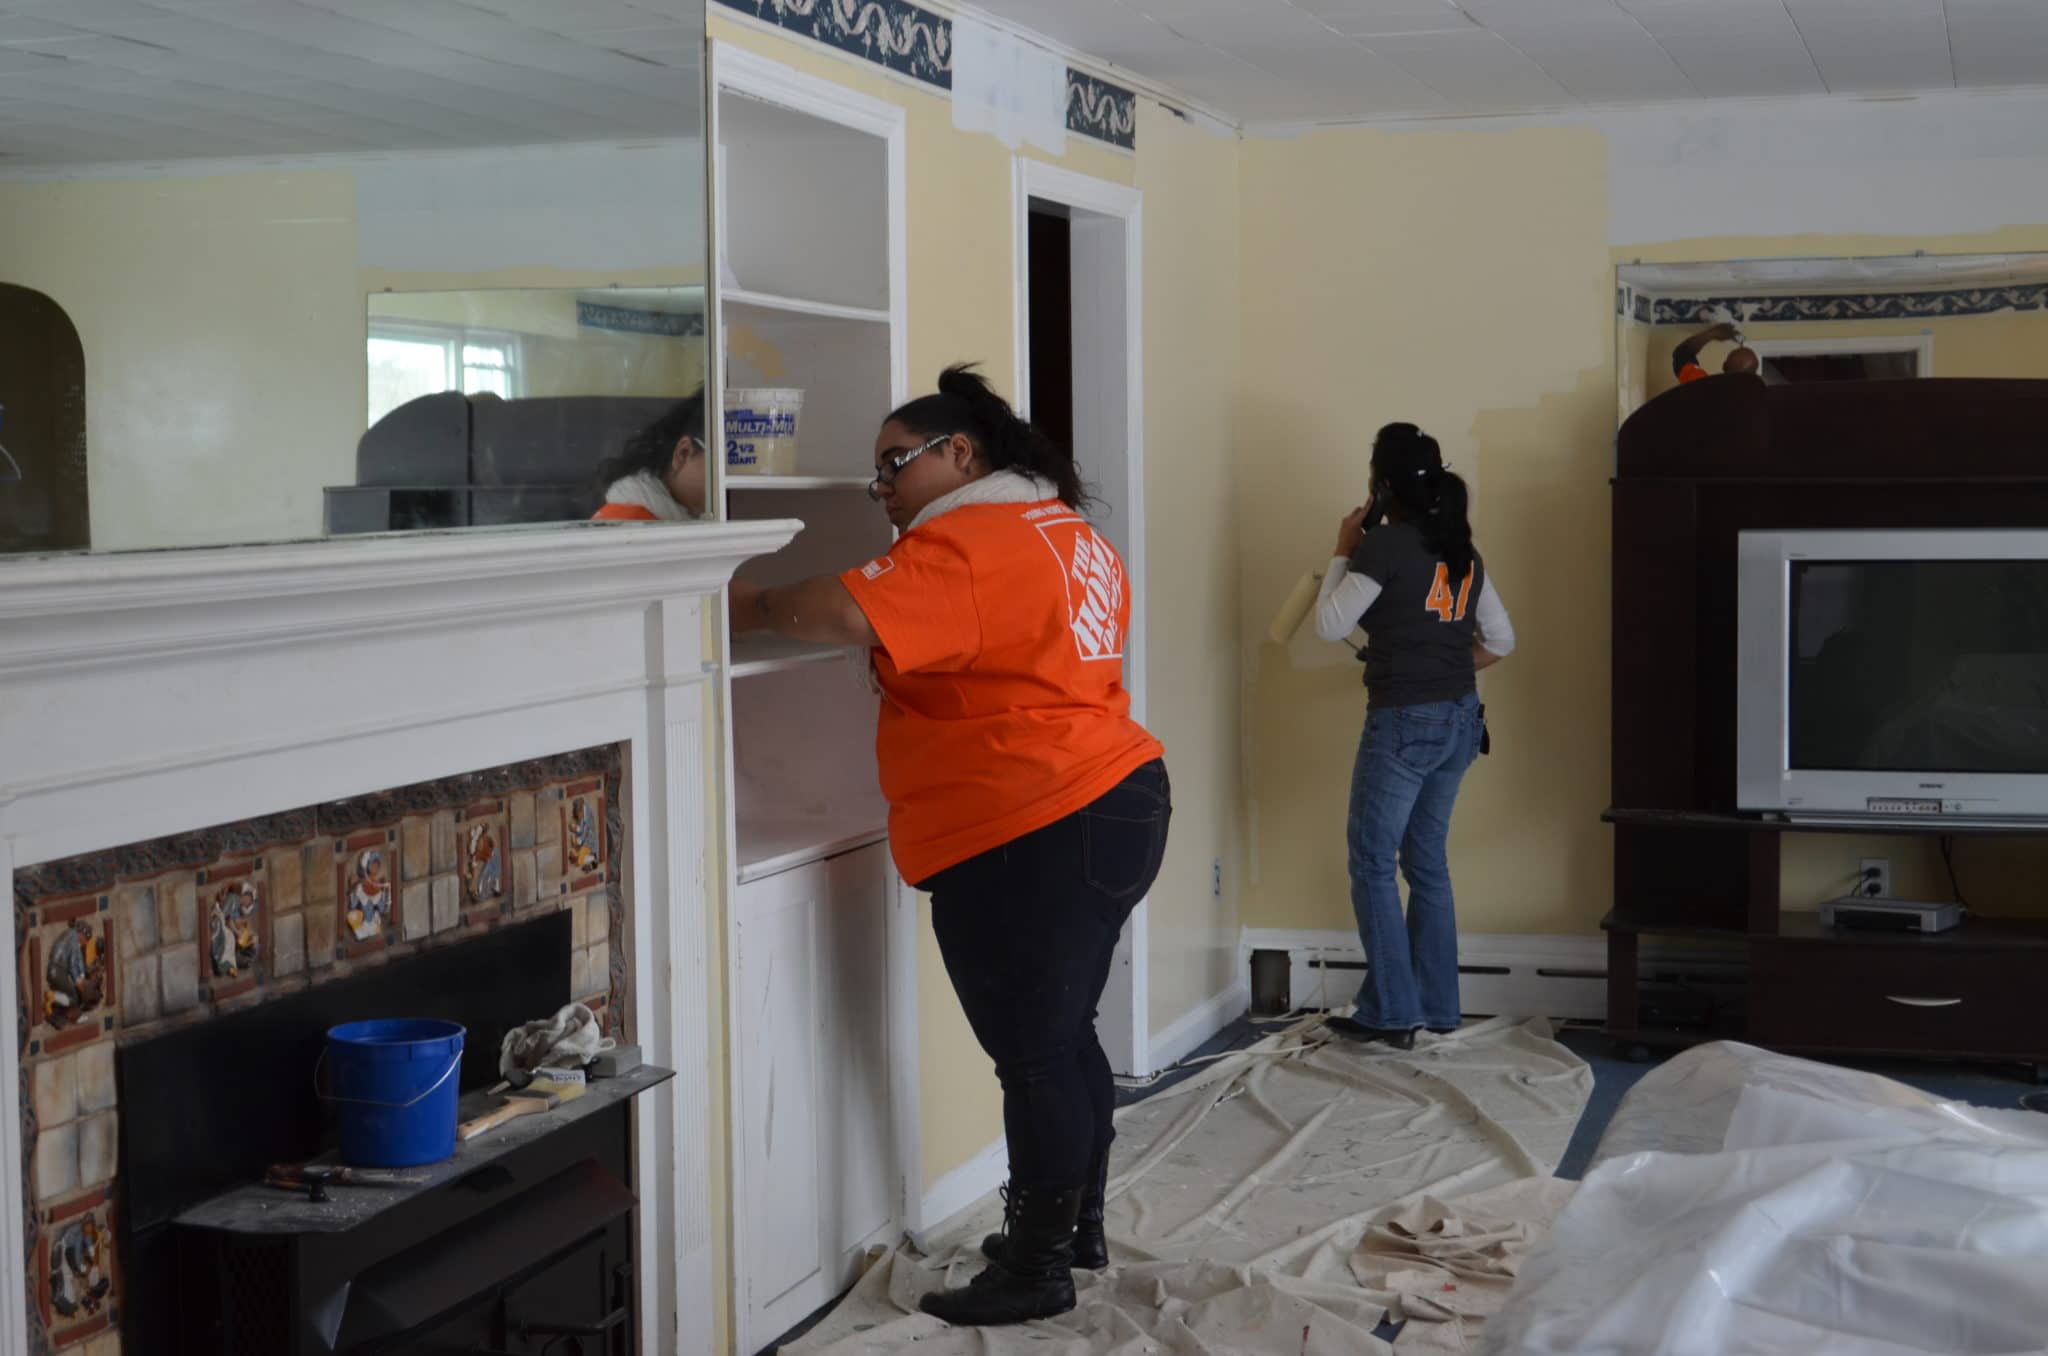 Home Depot To Repair Group Home In Ewing For People With Disabilities